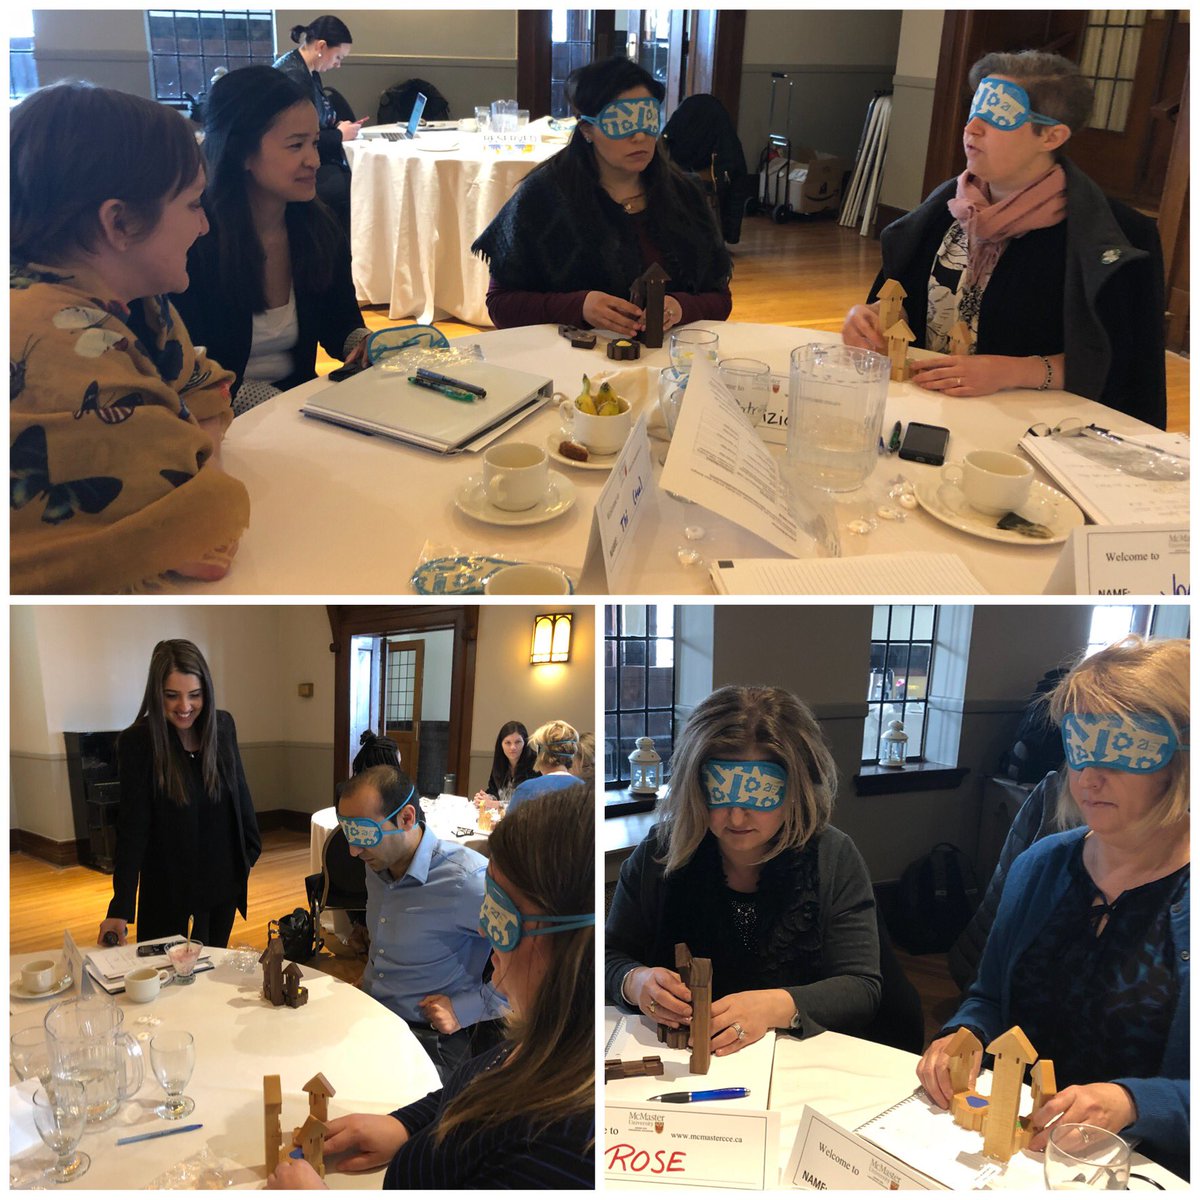 Empathy toy game underway at #StrategicLeaders.  Lots of fun and learning @McMasterContEd.